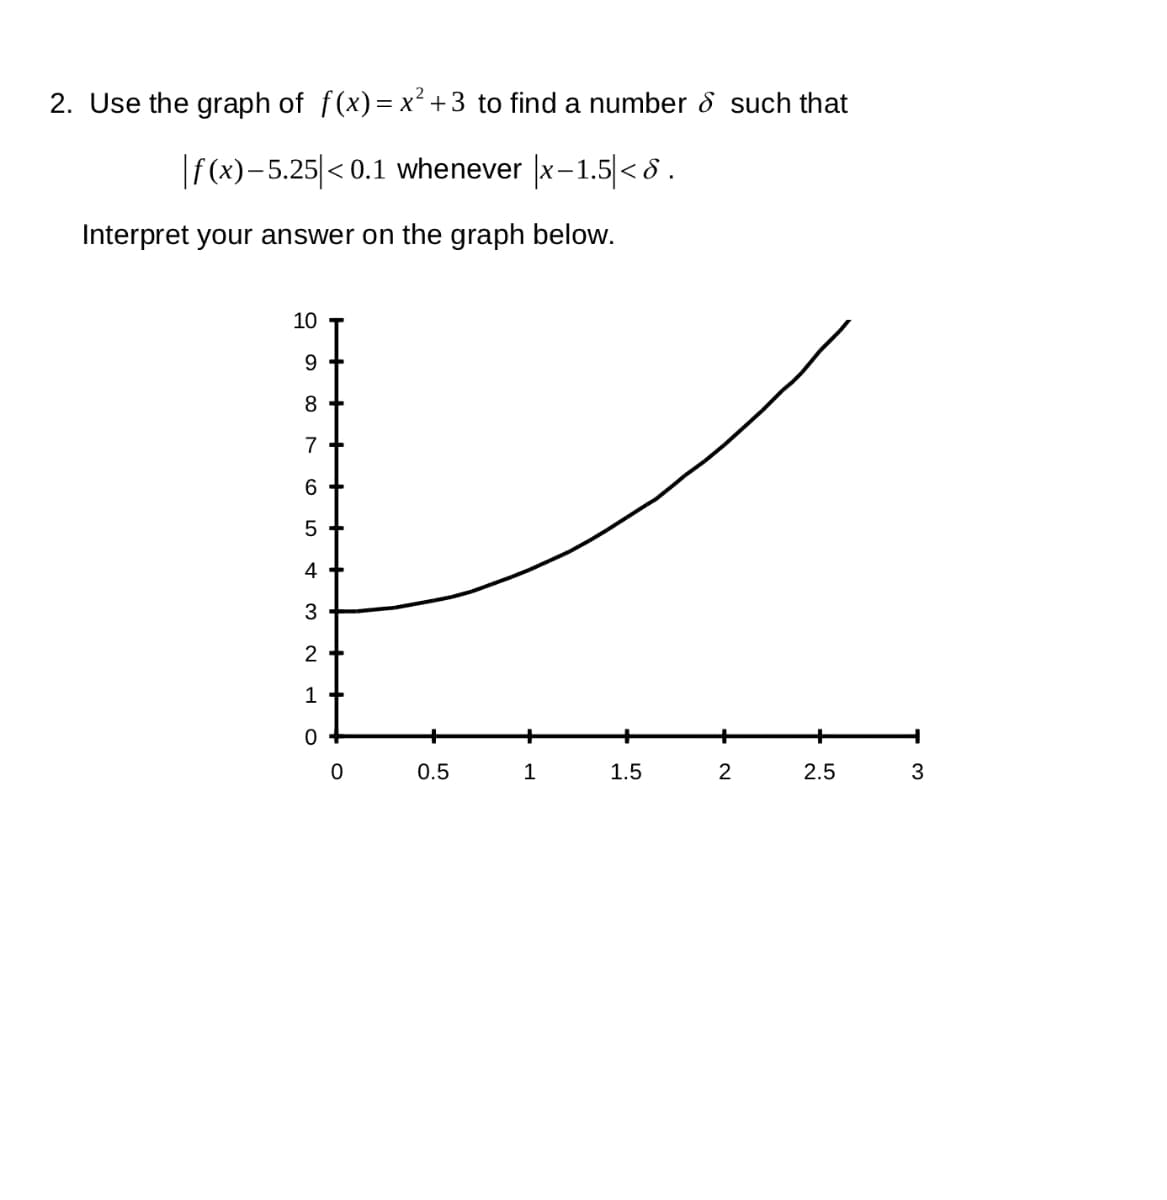 2. Use the graph of f(x)=x² +3 to find a number & such that
|f(x)-5.25 <0.1 whenever |x-1.5|<8.
Interpret your answer on the graph below.
K
5
10
9
8
7
6
4
3
2
1
0
0
0.5
1
1.5
2
2.5
3